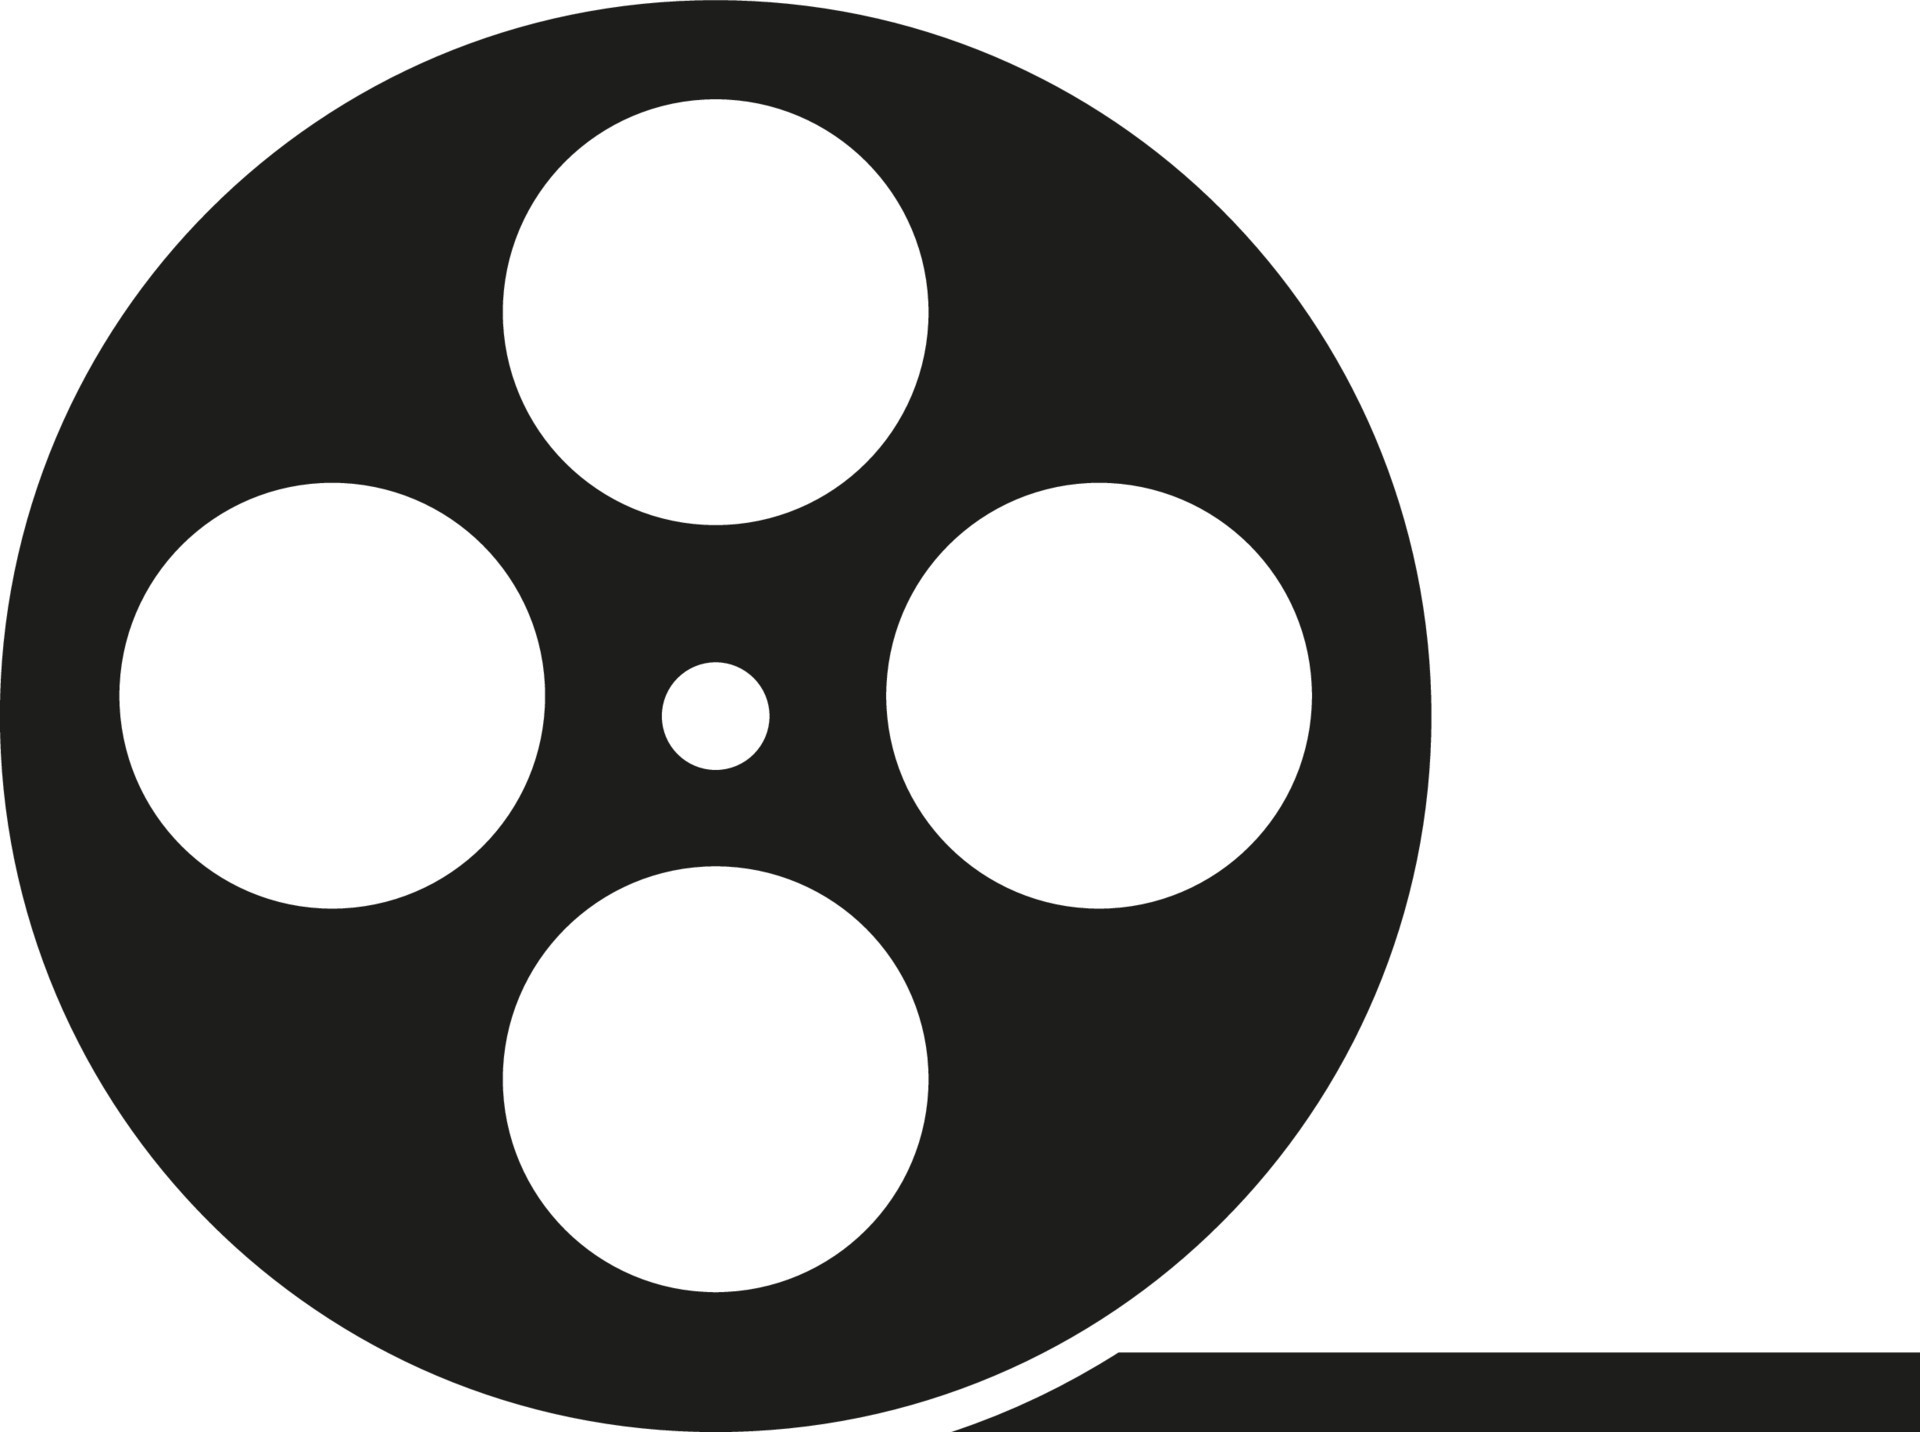 Film roll icon vector or video camera tape reel flat sign symbols